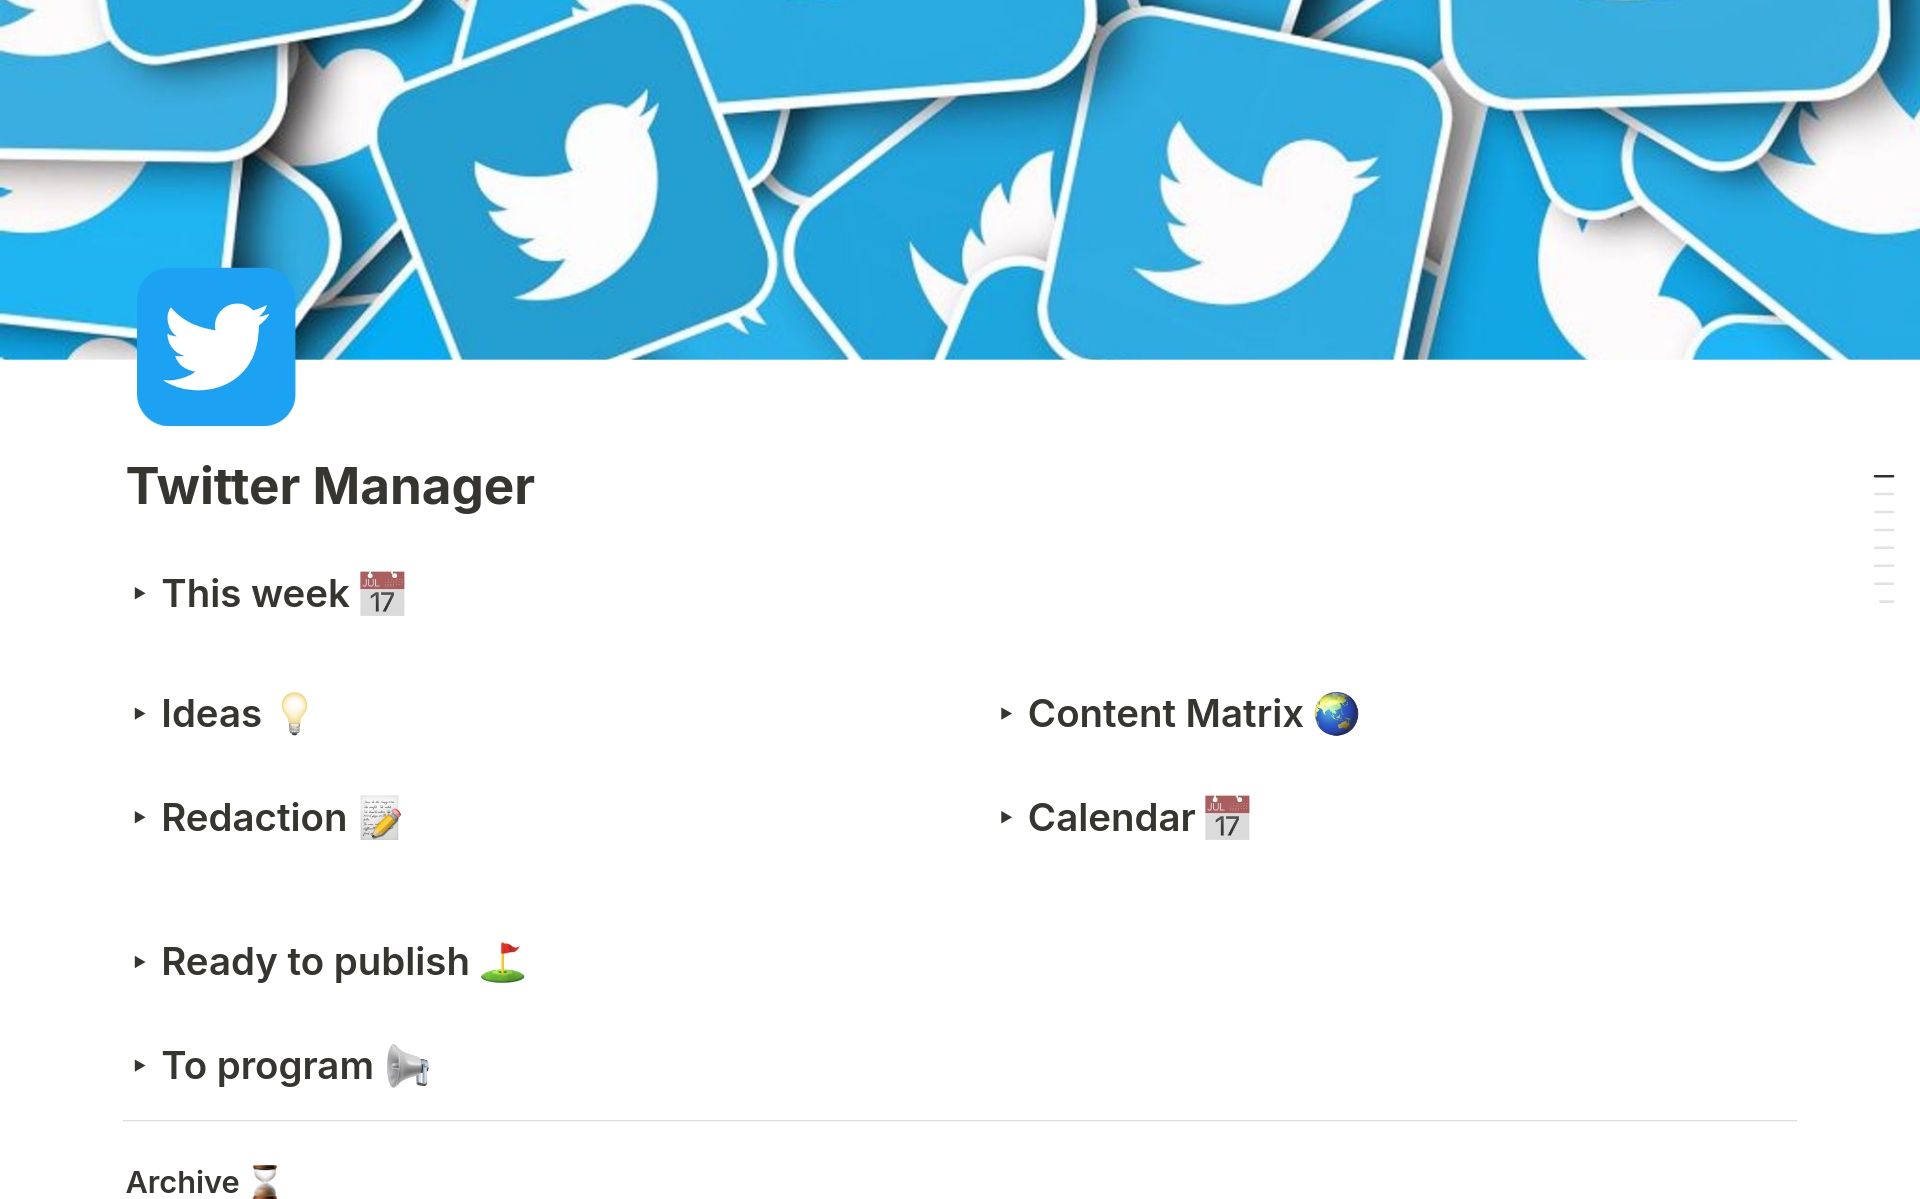 A tweets manager to gather your ideas and organize your redaction and publications